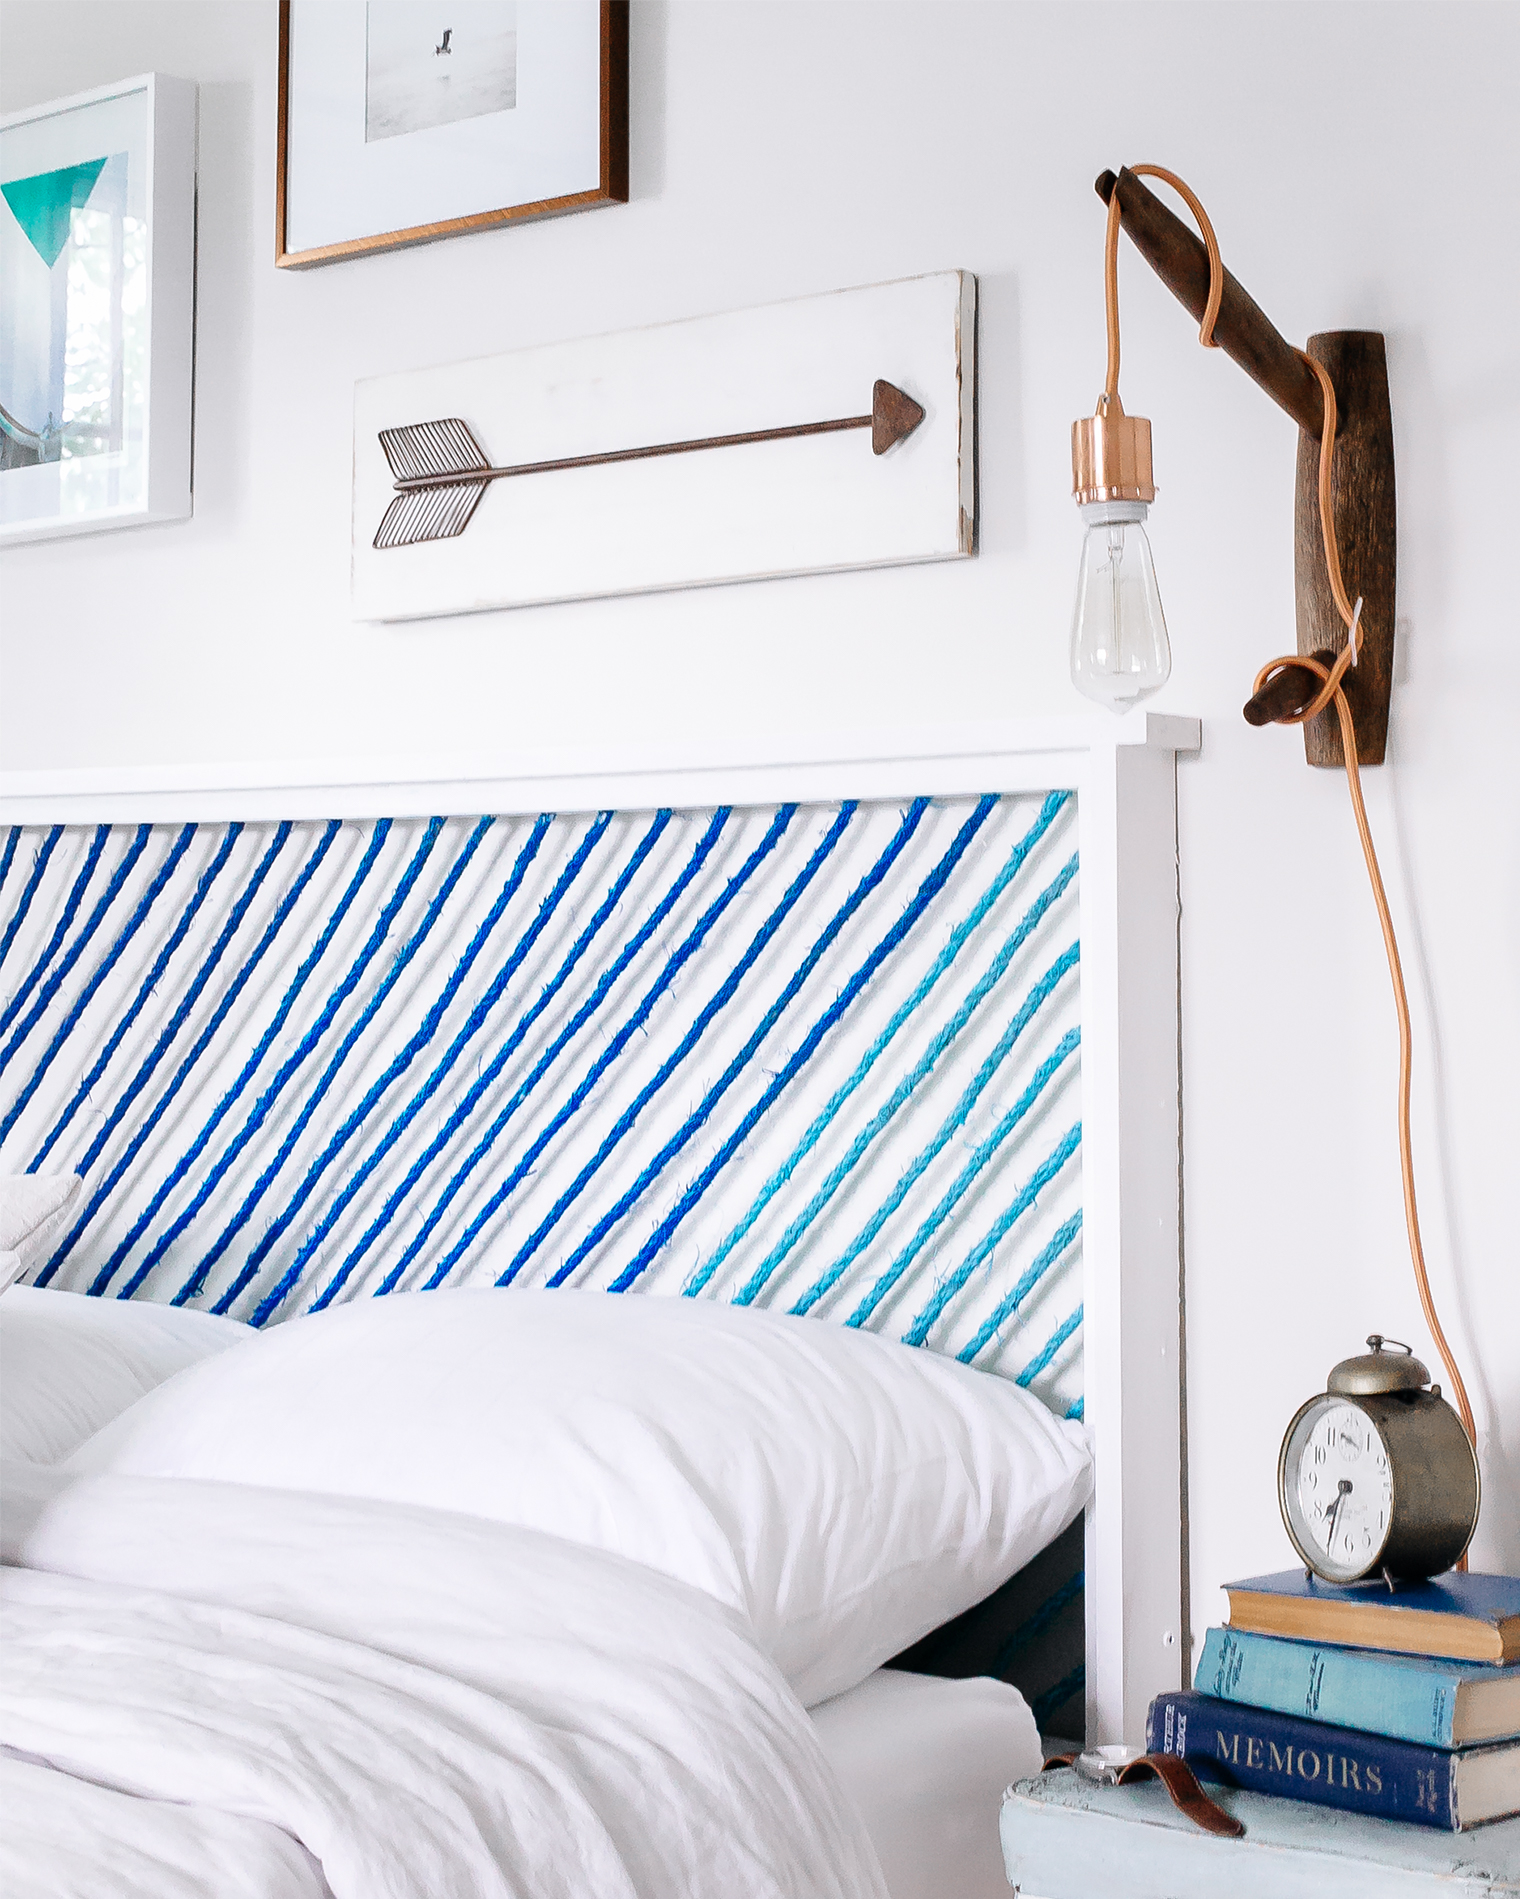 DIY-Painted-Rope-Headboard-Bed-How-To-6